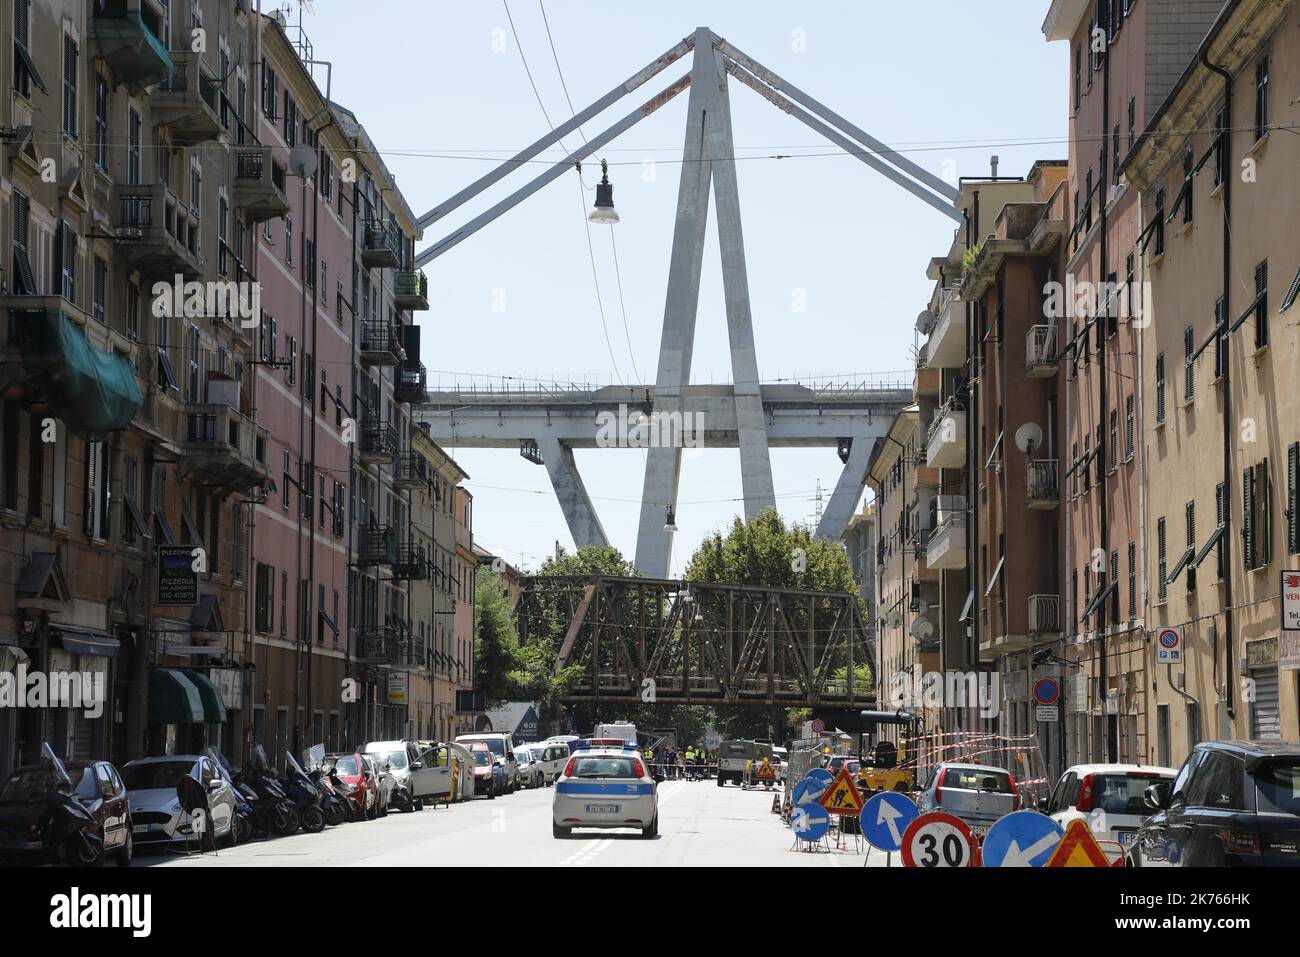 A collapsed bridge over the A10 highway in Genoa, Italy, 14 August 2018. At least 30 people are believed to have died as a large section of the Morandi viaduct upon which the A10 motorway runs collapsed in Genoa on Tuesday. Stock Photo